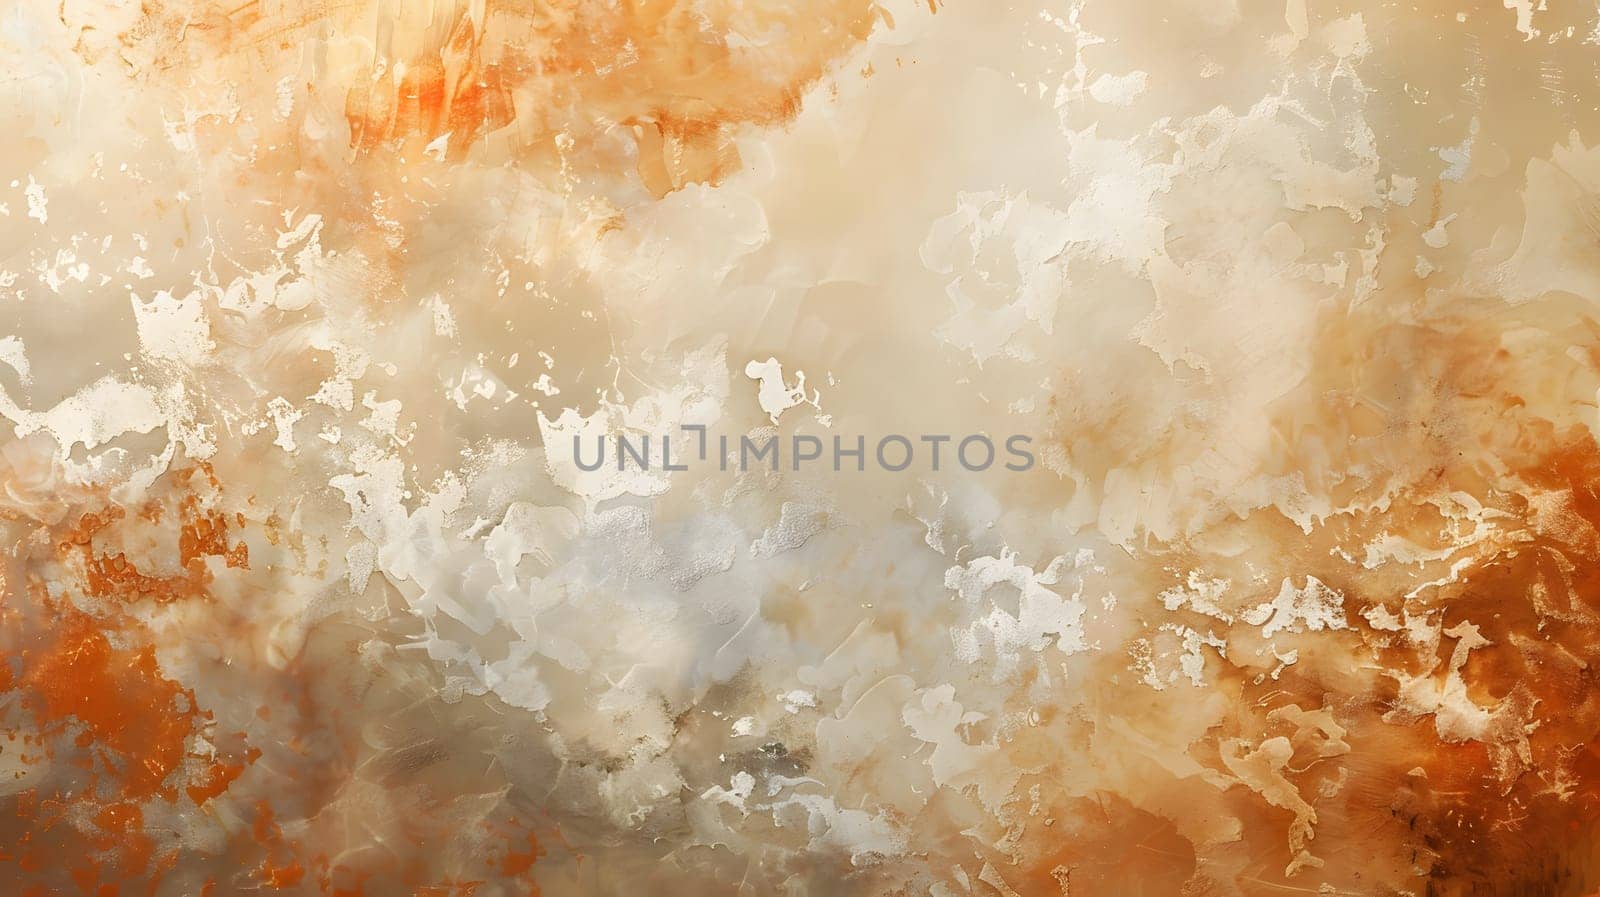 An artistic representation of a cloudy amber sky, with cumulus clouds resembling petals. The natural landscape includes trees and plants creating a beautiful pattern